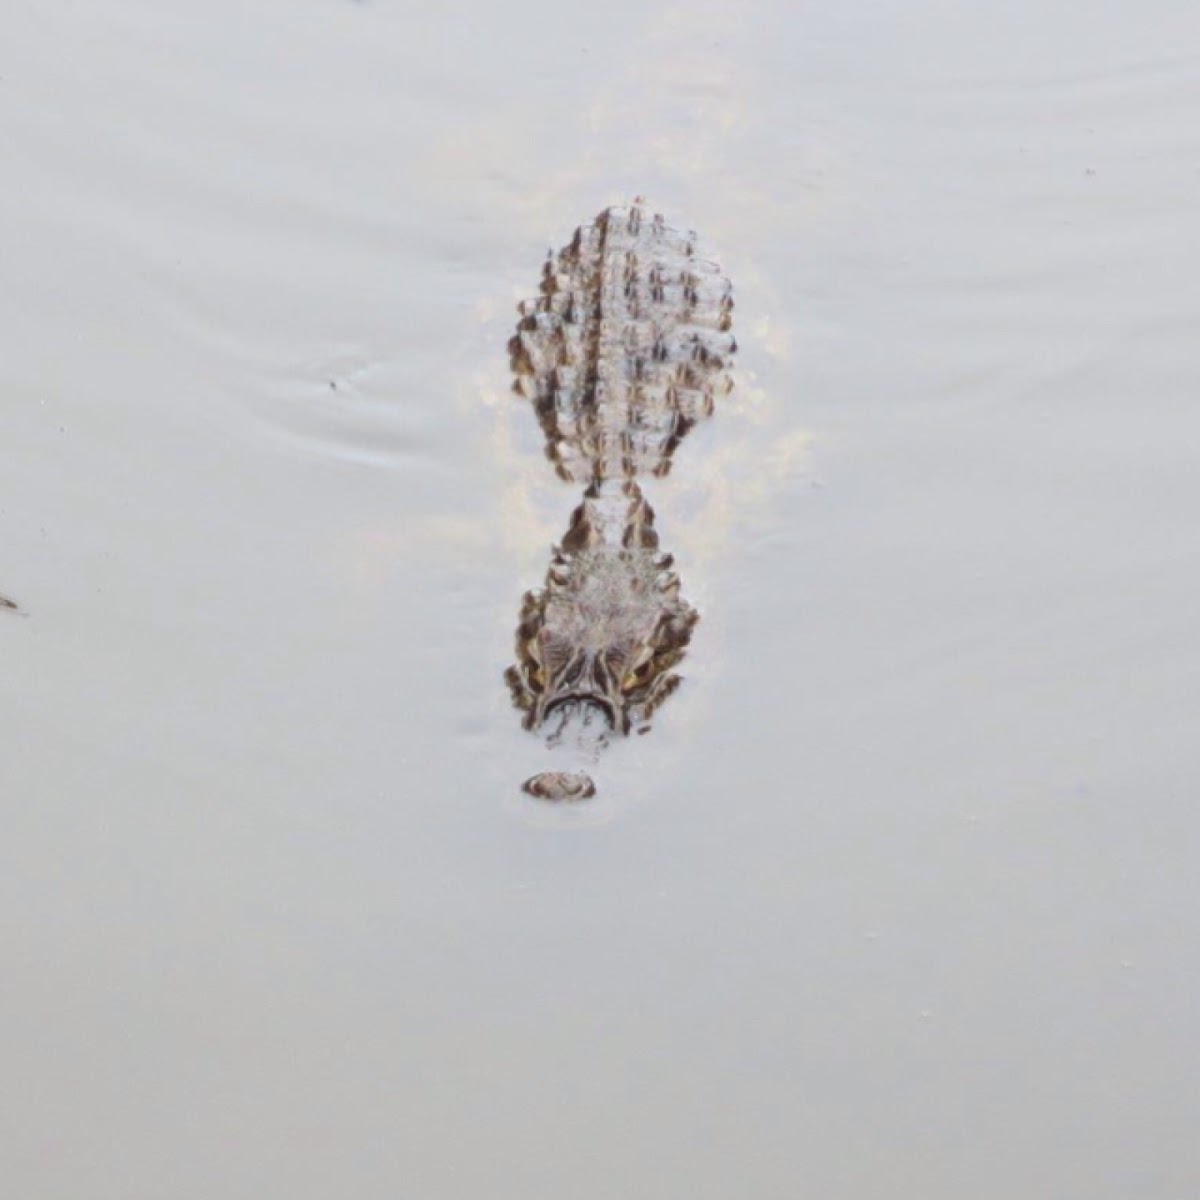 Broad snouted caiman